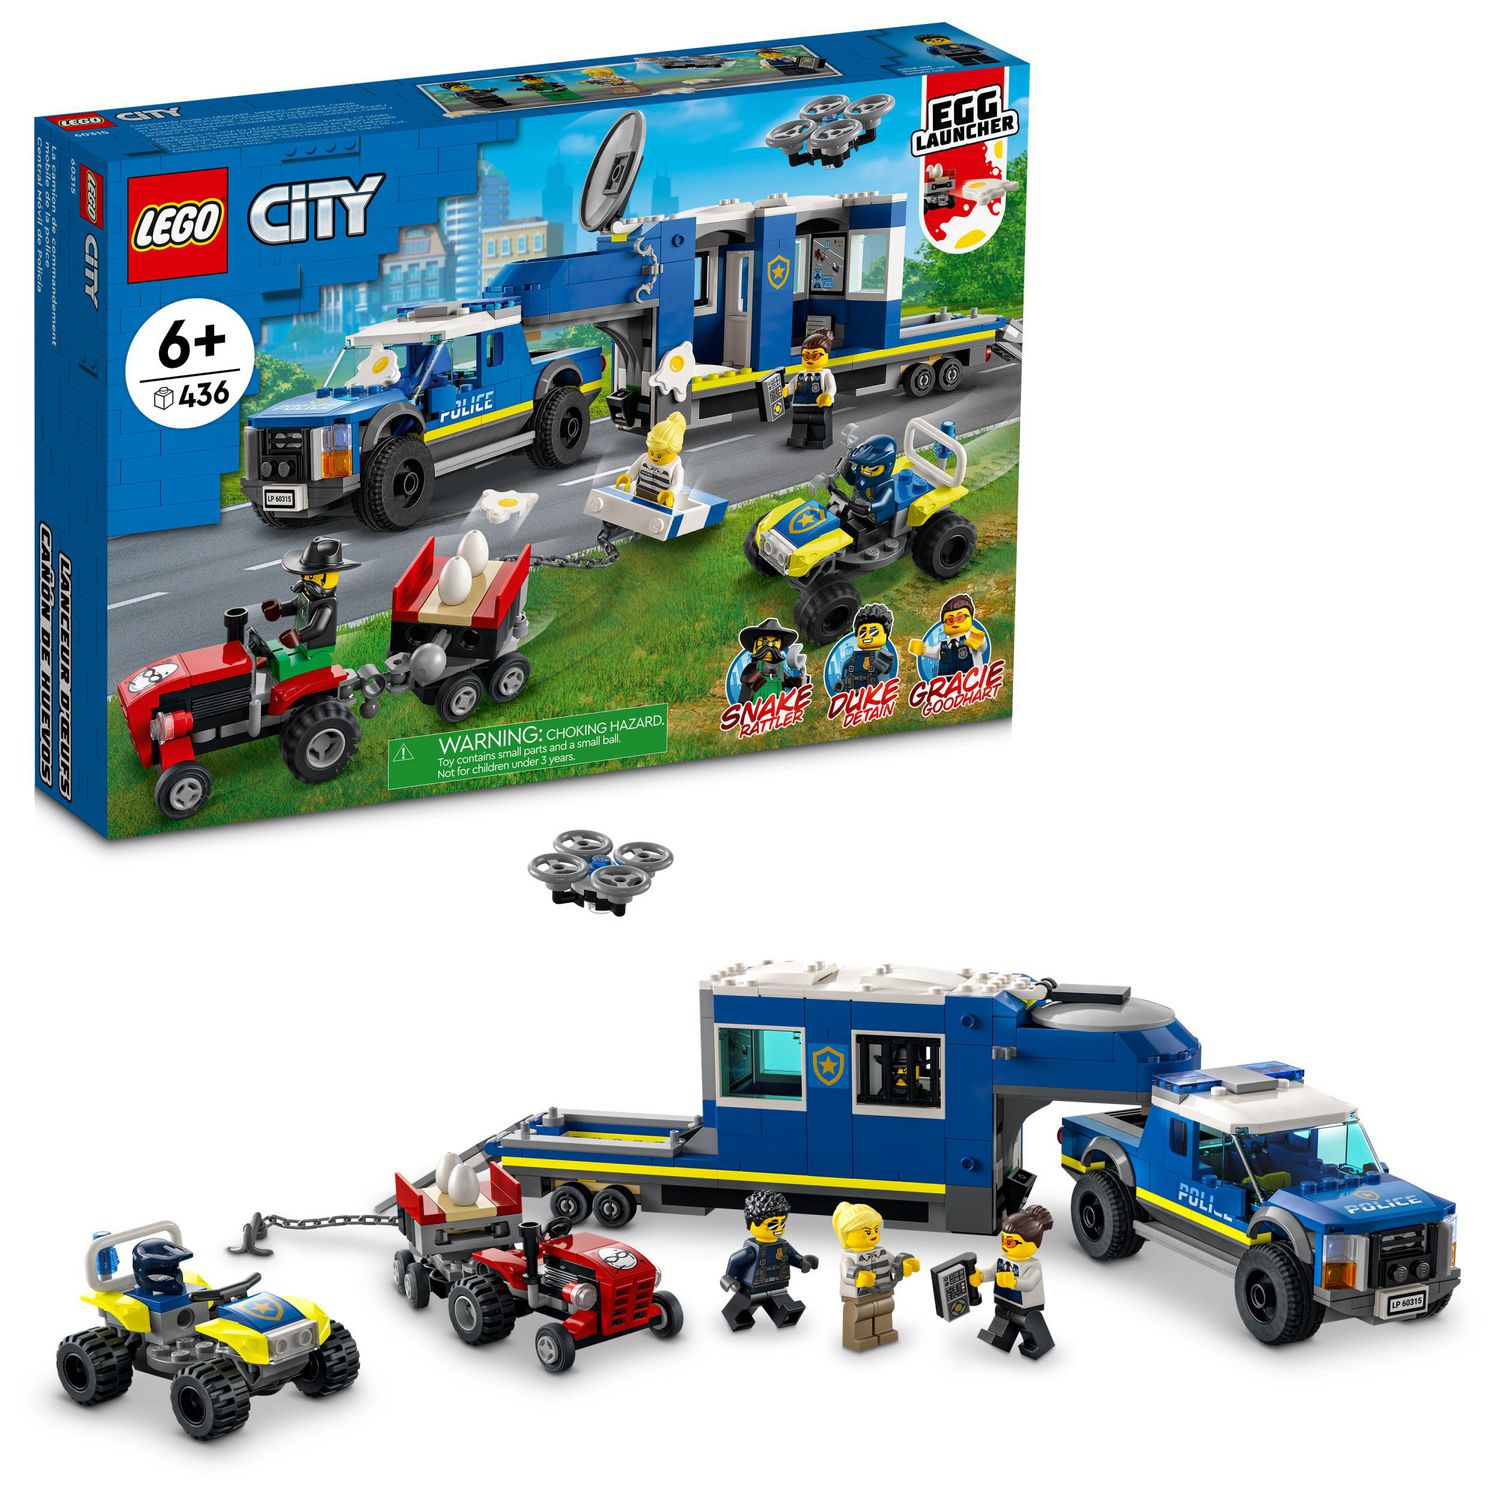 Mobile　Truck　City　LEGO　Building　Kit　Ages　Includes　Pieces,　(436　Police　436　60315　Command　Pieces),　Toy　6+